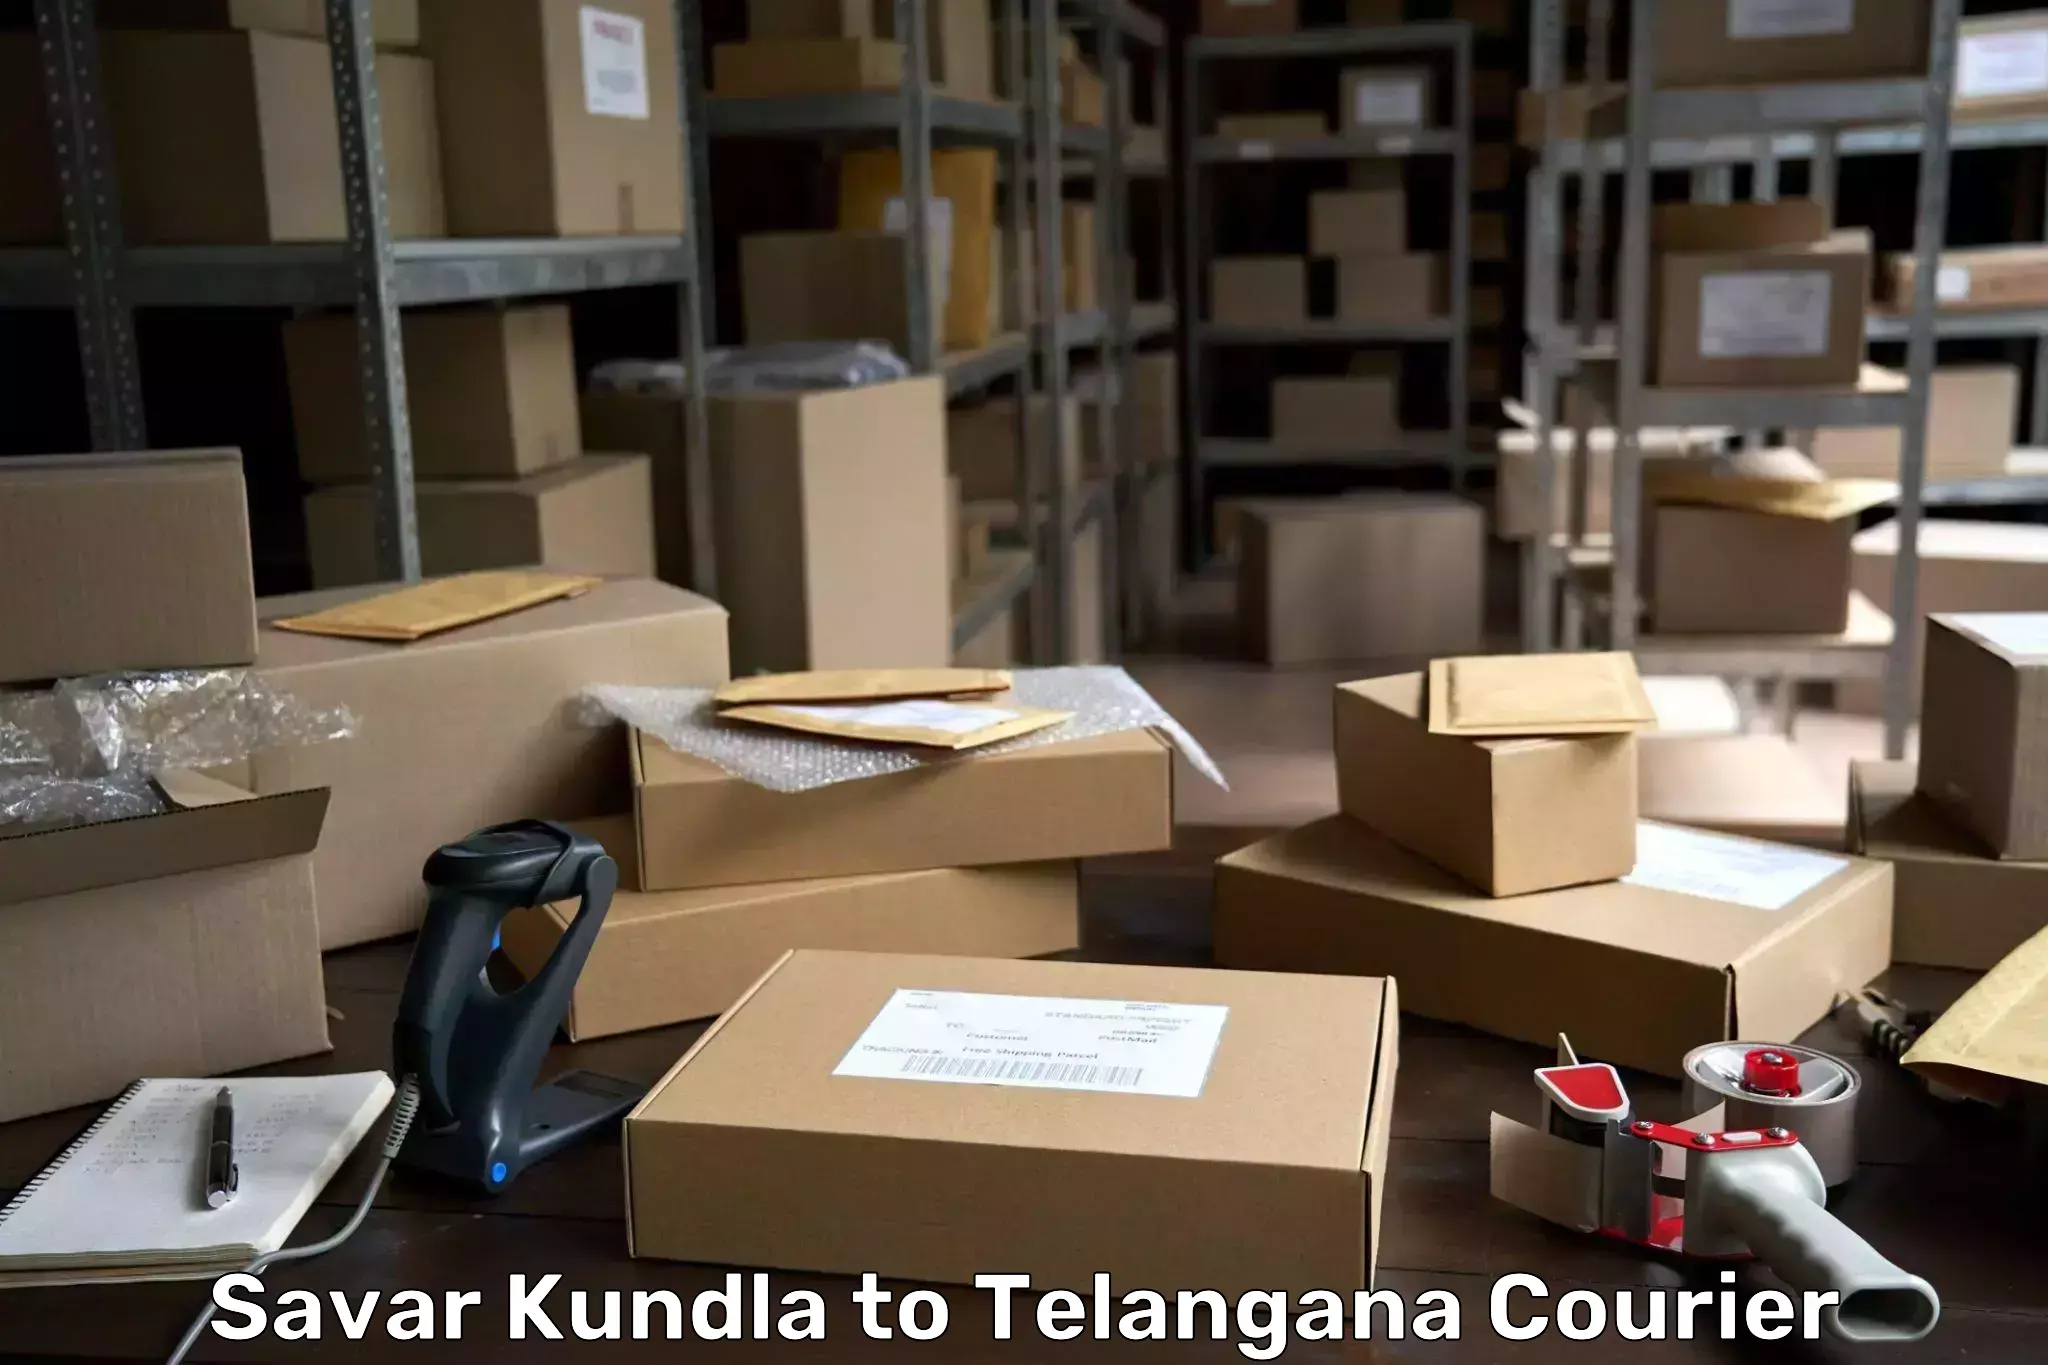 On-call courier service Savar Kundla to Chintoor